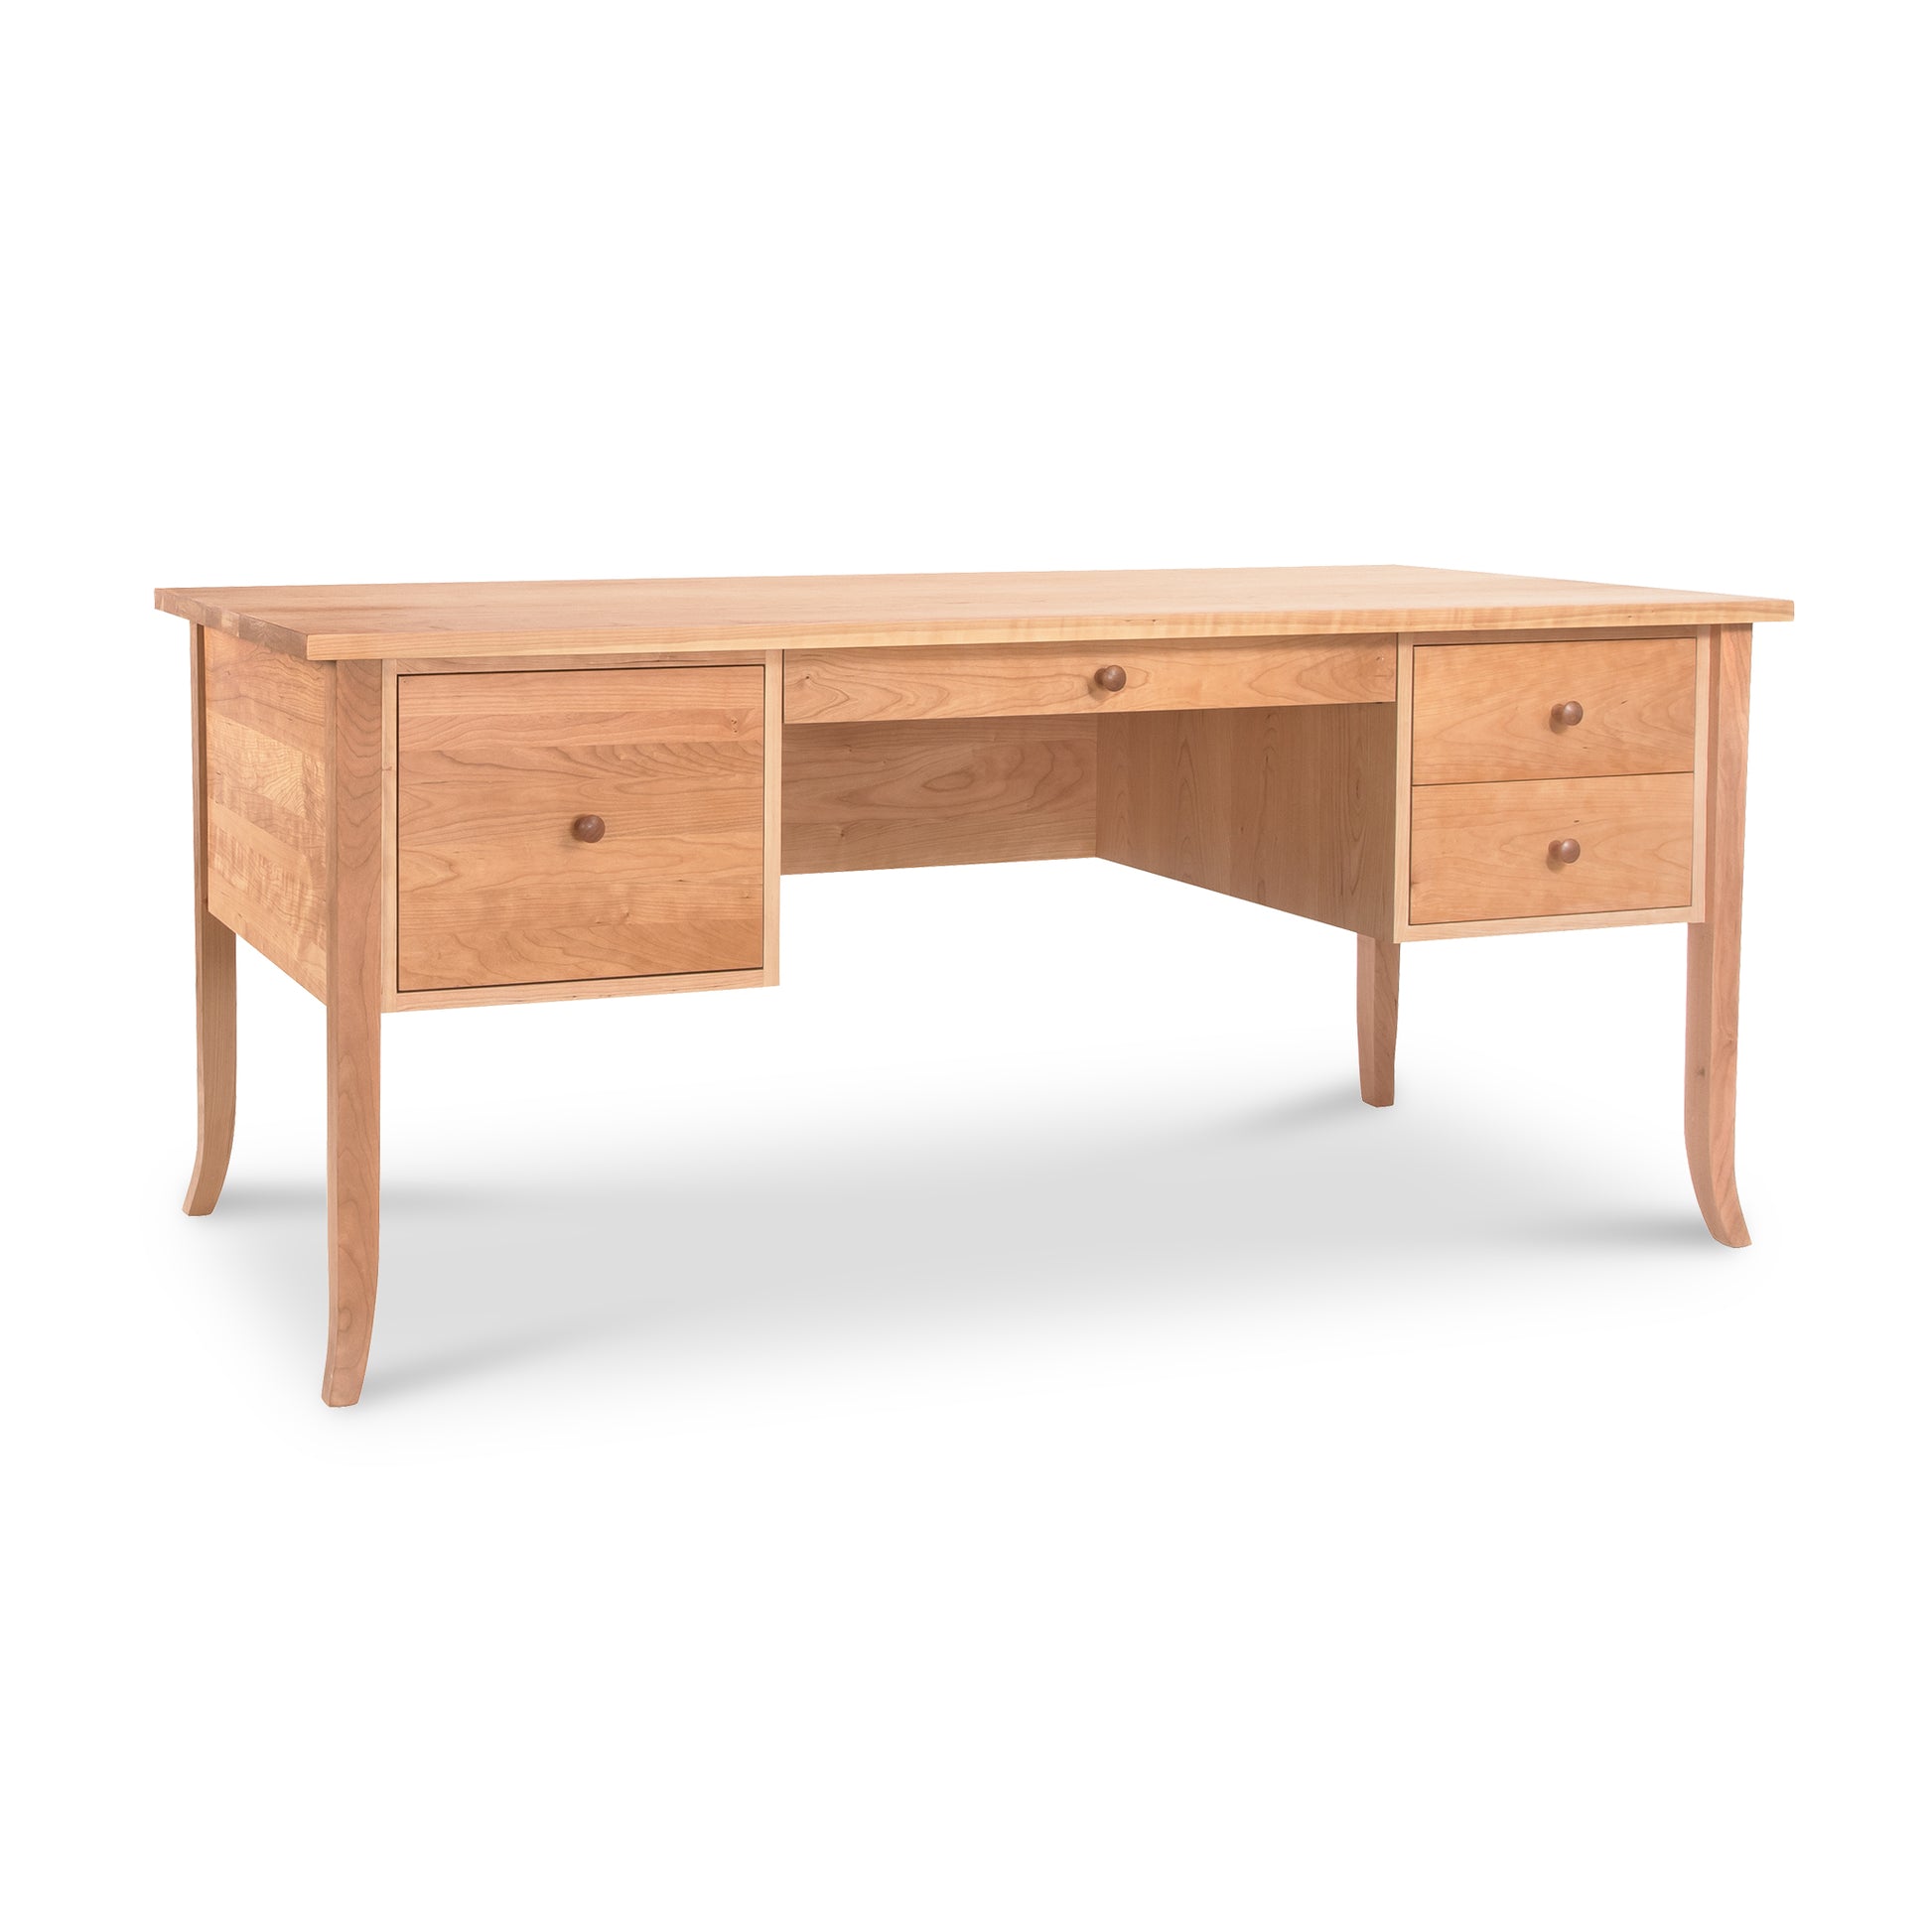 A Large Wood Flare Leg Executive Desk made from sustainable harvested woods, featuring two drawers by Lyndon Furniture.